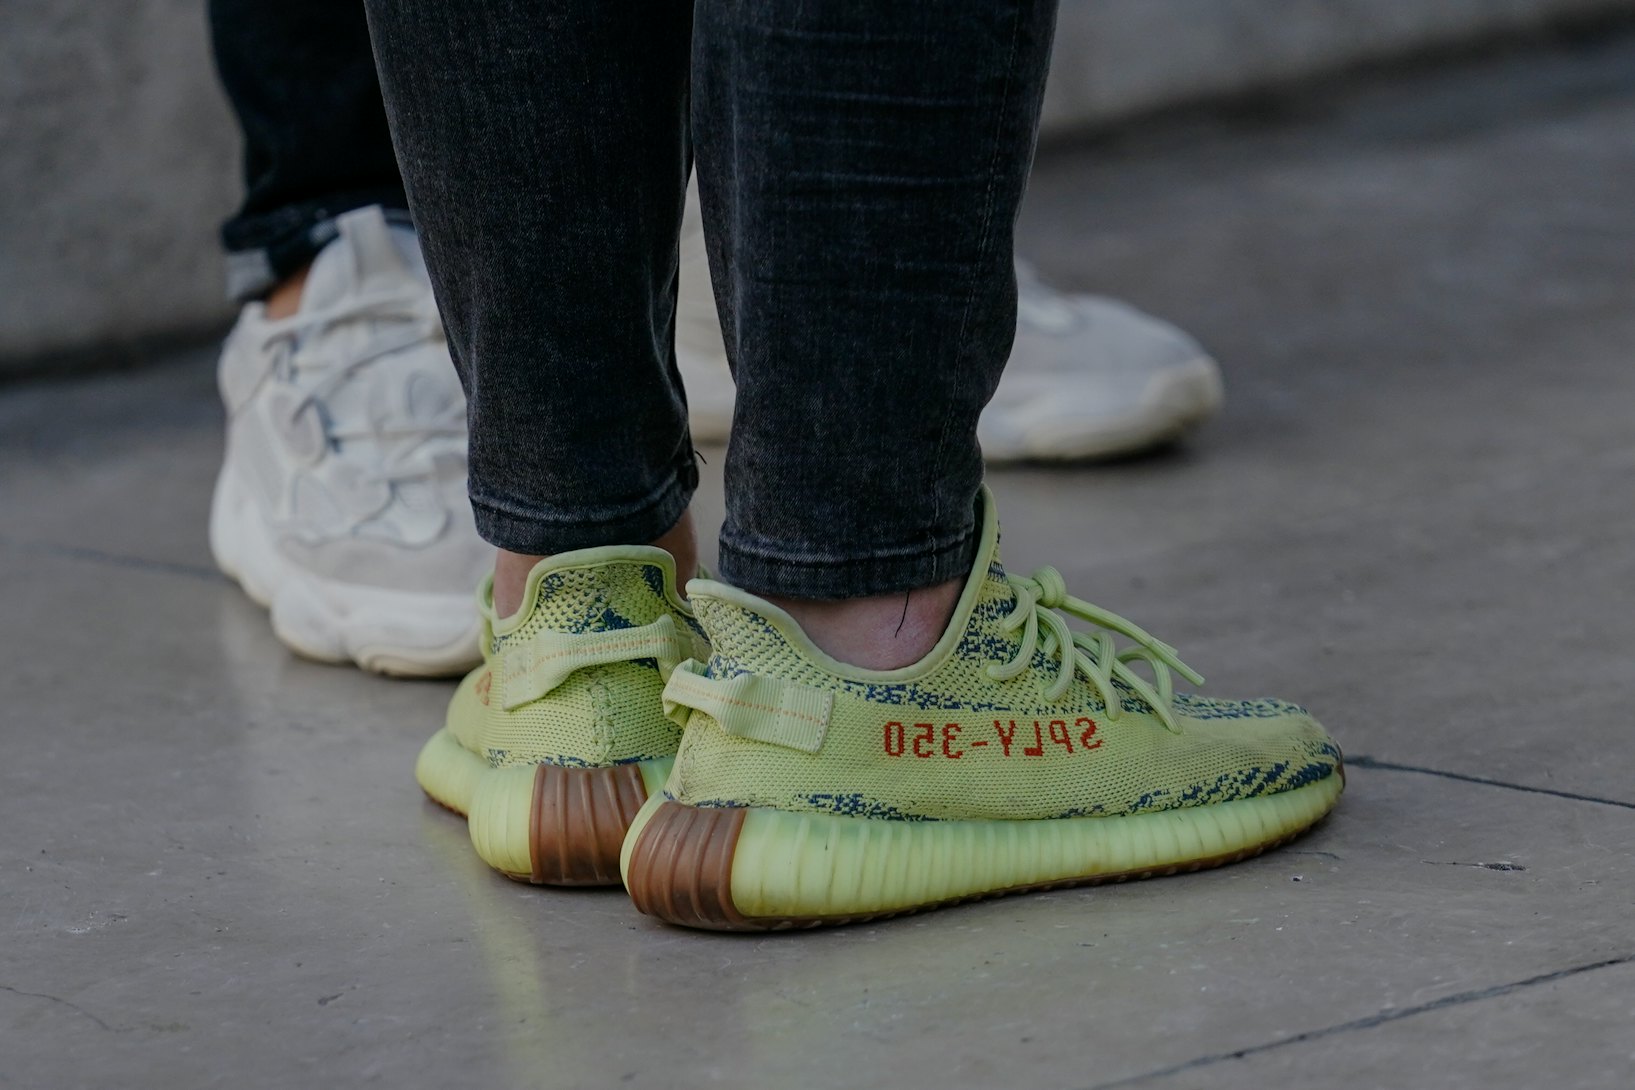 lusted-after Yeezy 350 V2 lost its